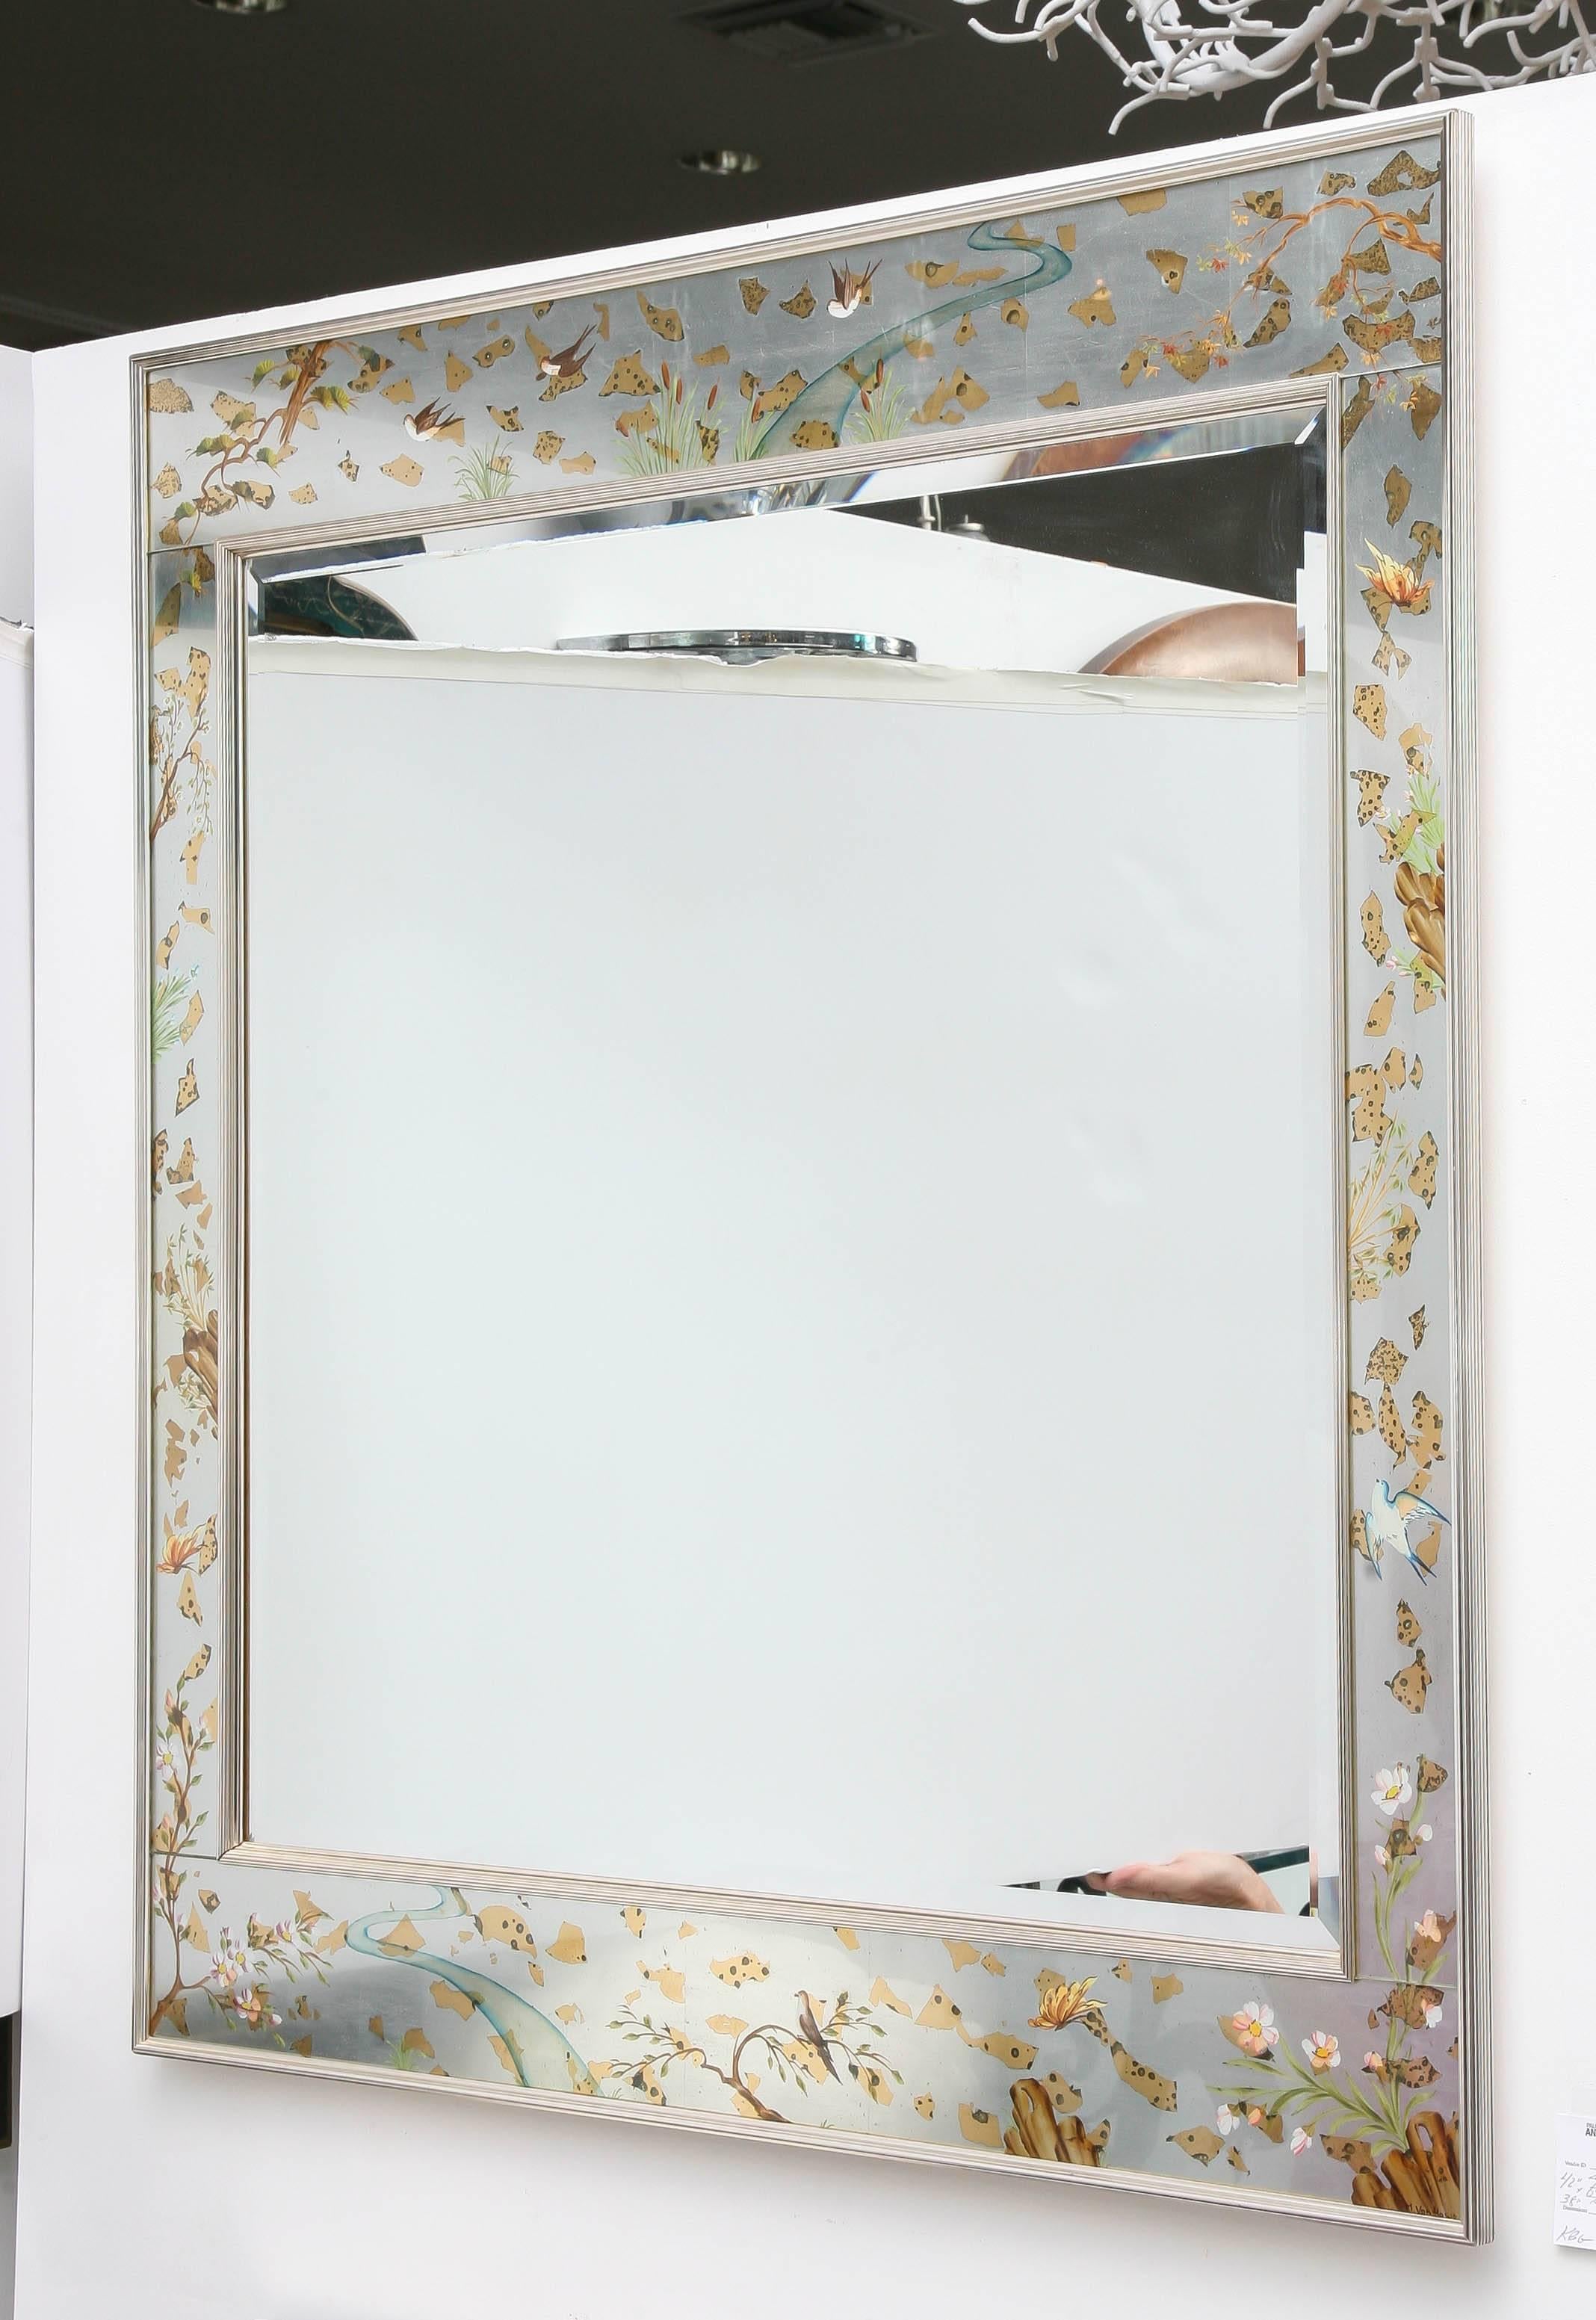 Vintage La Barge reverse painted mirror with flora and fauna. The frame of the mirror is aluminum. It is signed.